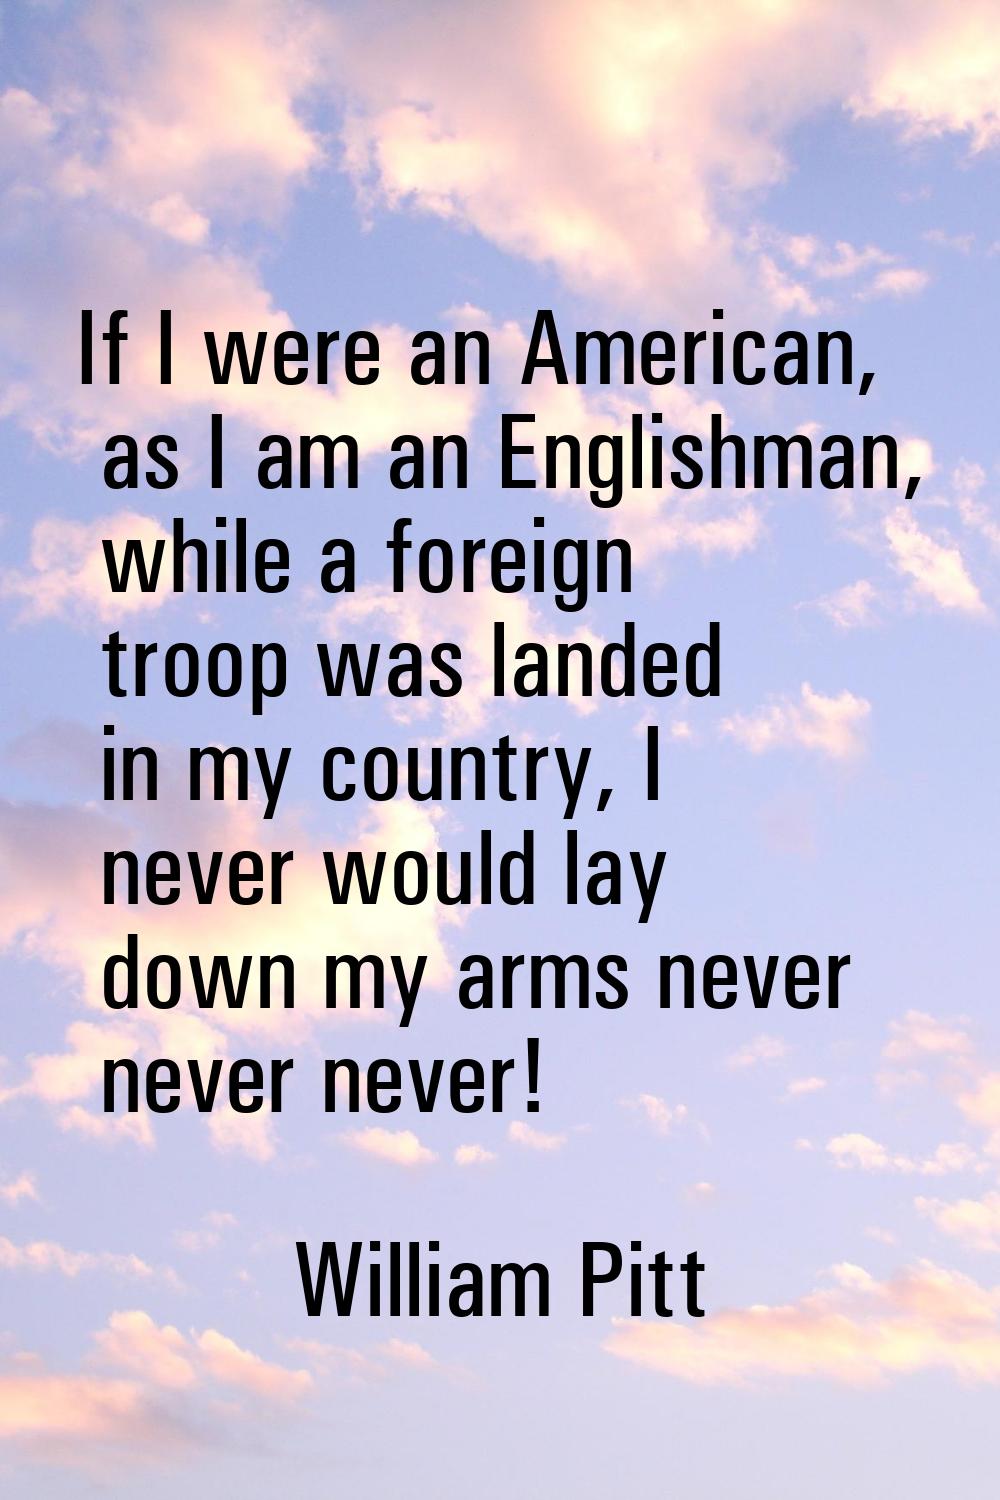 If I were an American, as I am an Englishman, while a foreign troop was landed in my country, I nev